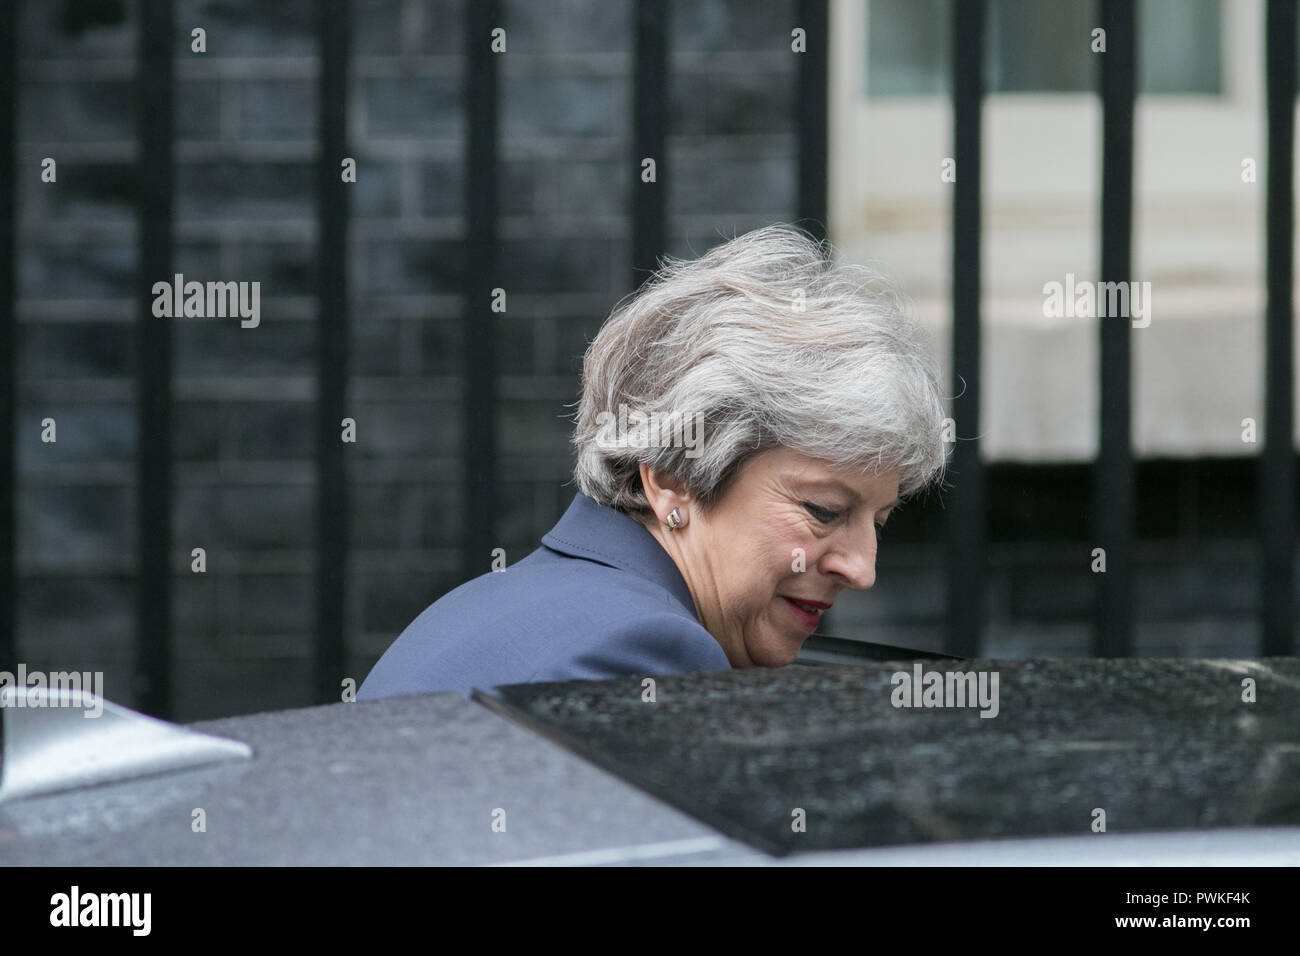 London UK. 17th October 2018.British Prime Minister Theresa May leaves 10 Downing Street to attend the weekly PMQ's Prime Minister Questions before going to Brussels for Brexit talksCredit: amer ghazzal/Alamy Live News Stock Photo